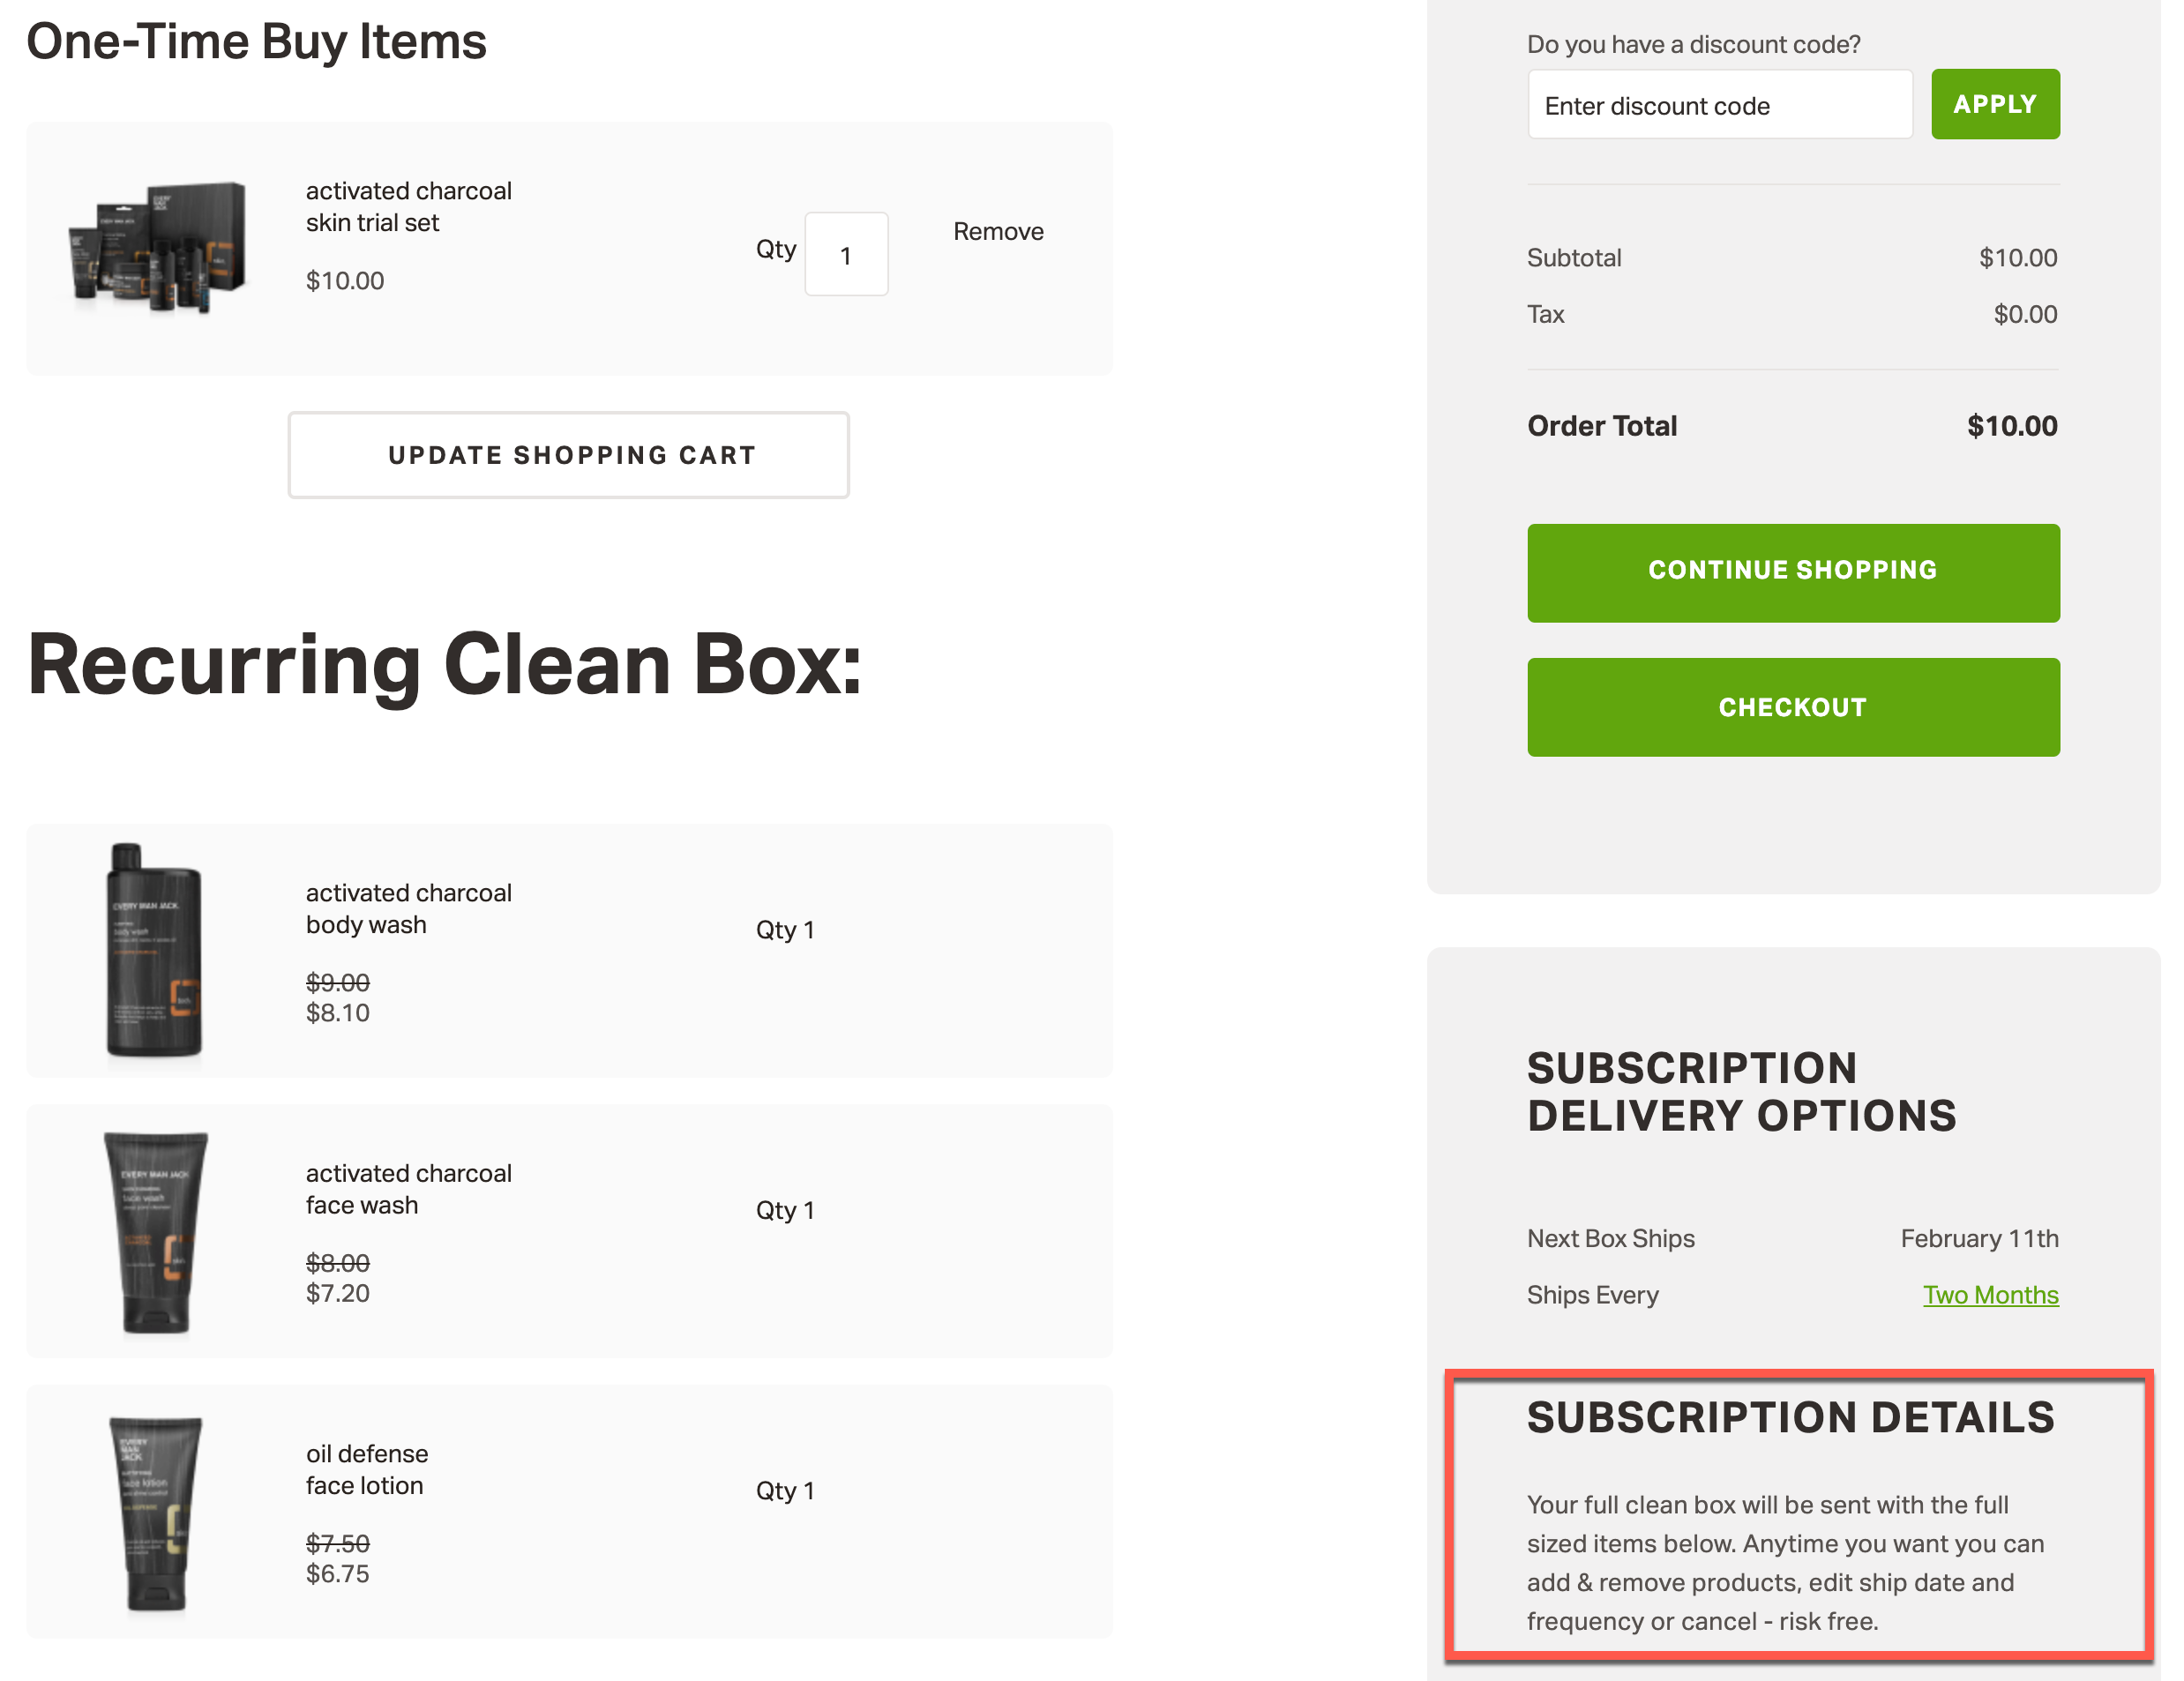 Subscription Tips: Screenshot of Every Man Jack's checkout page with Subscription details highlighted in a red box. Subscription details talk about how a full size box will be sent after the trial set.